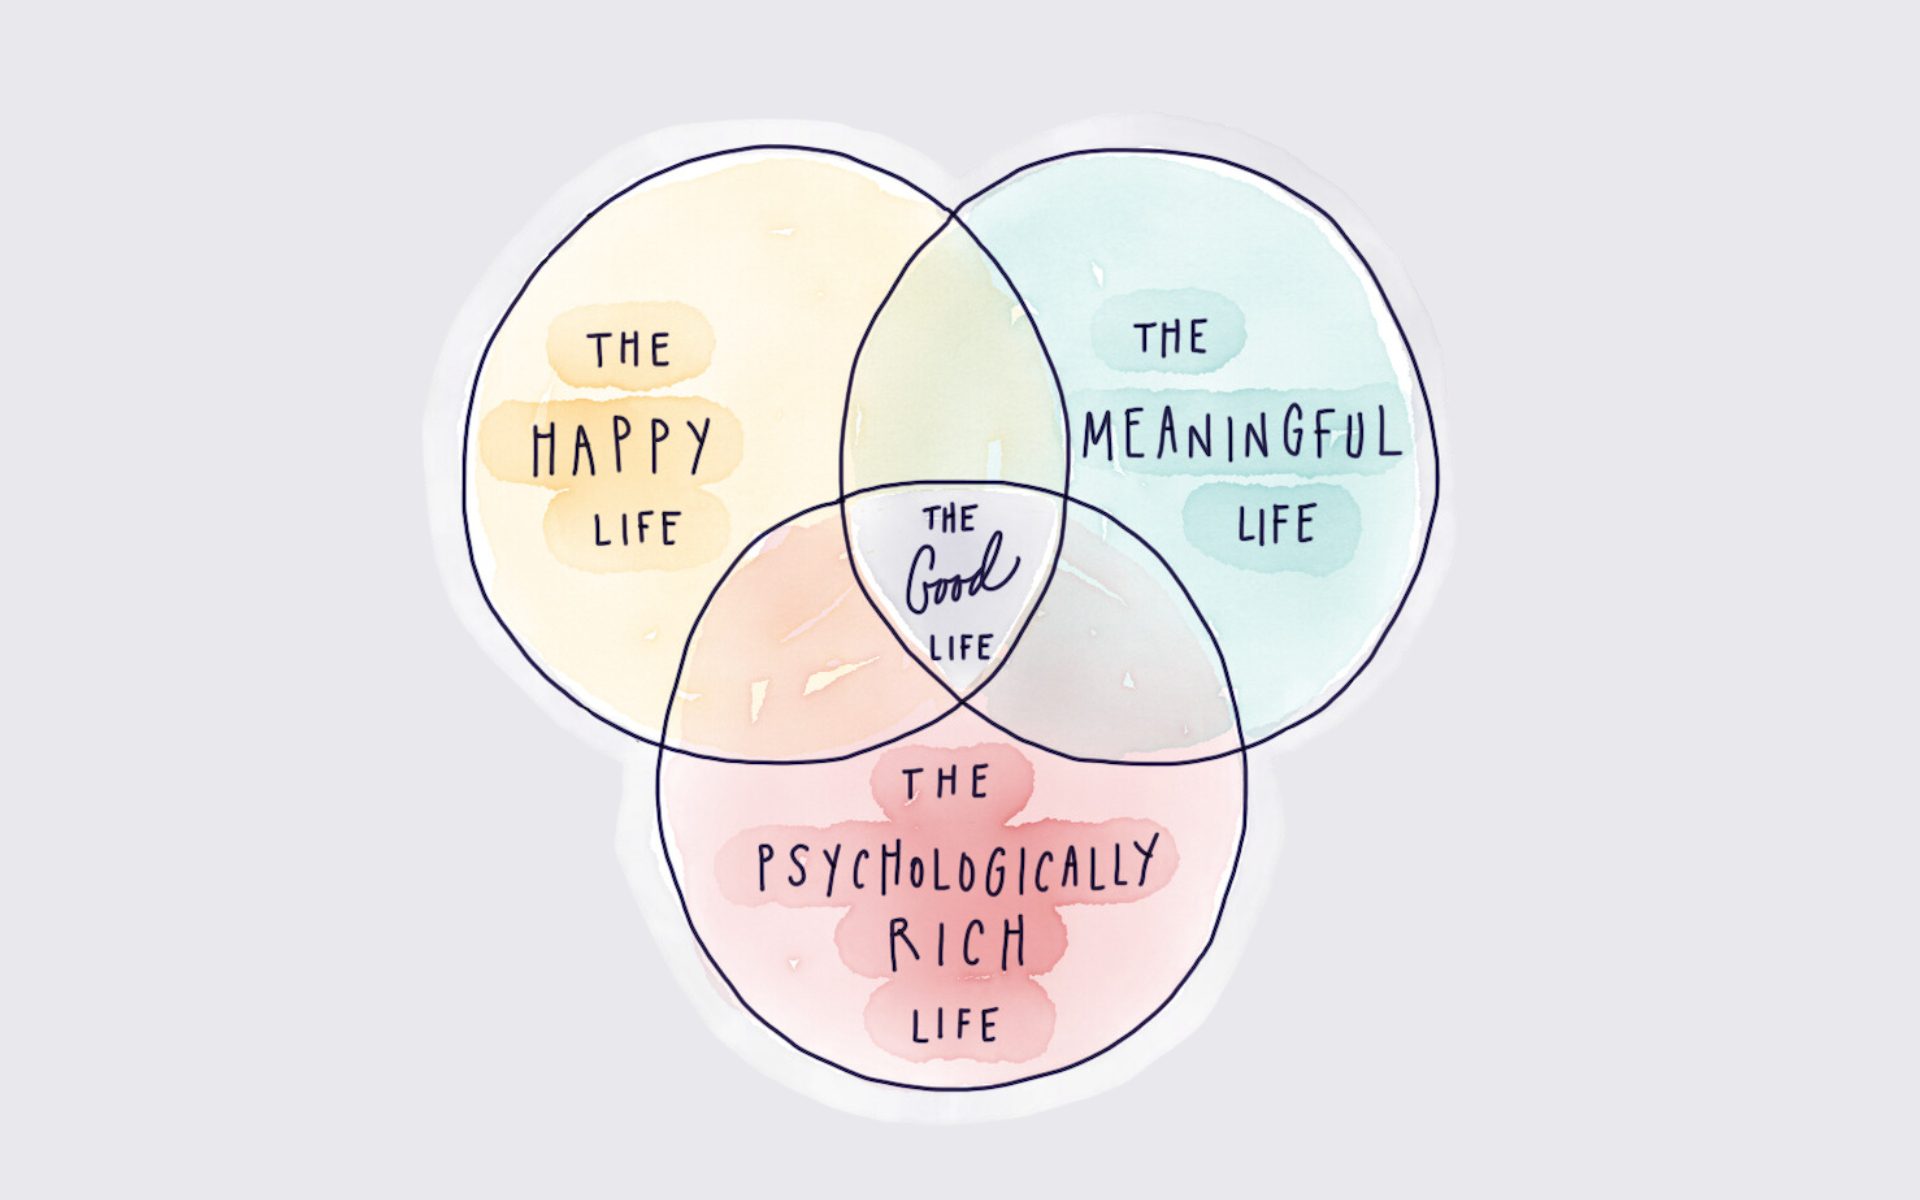 How “Psychologically Rich” Are You?